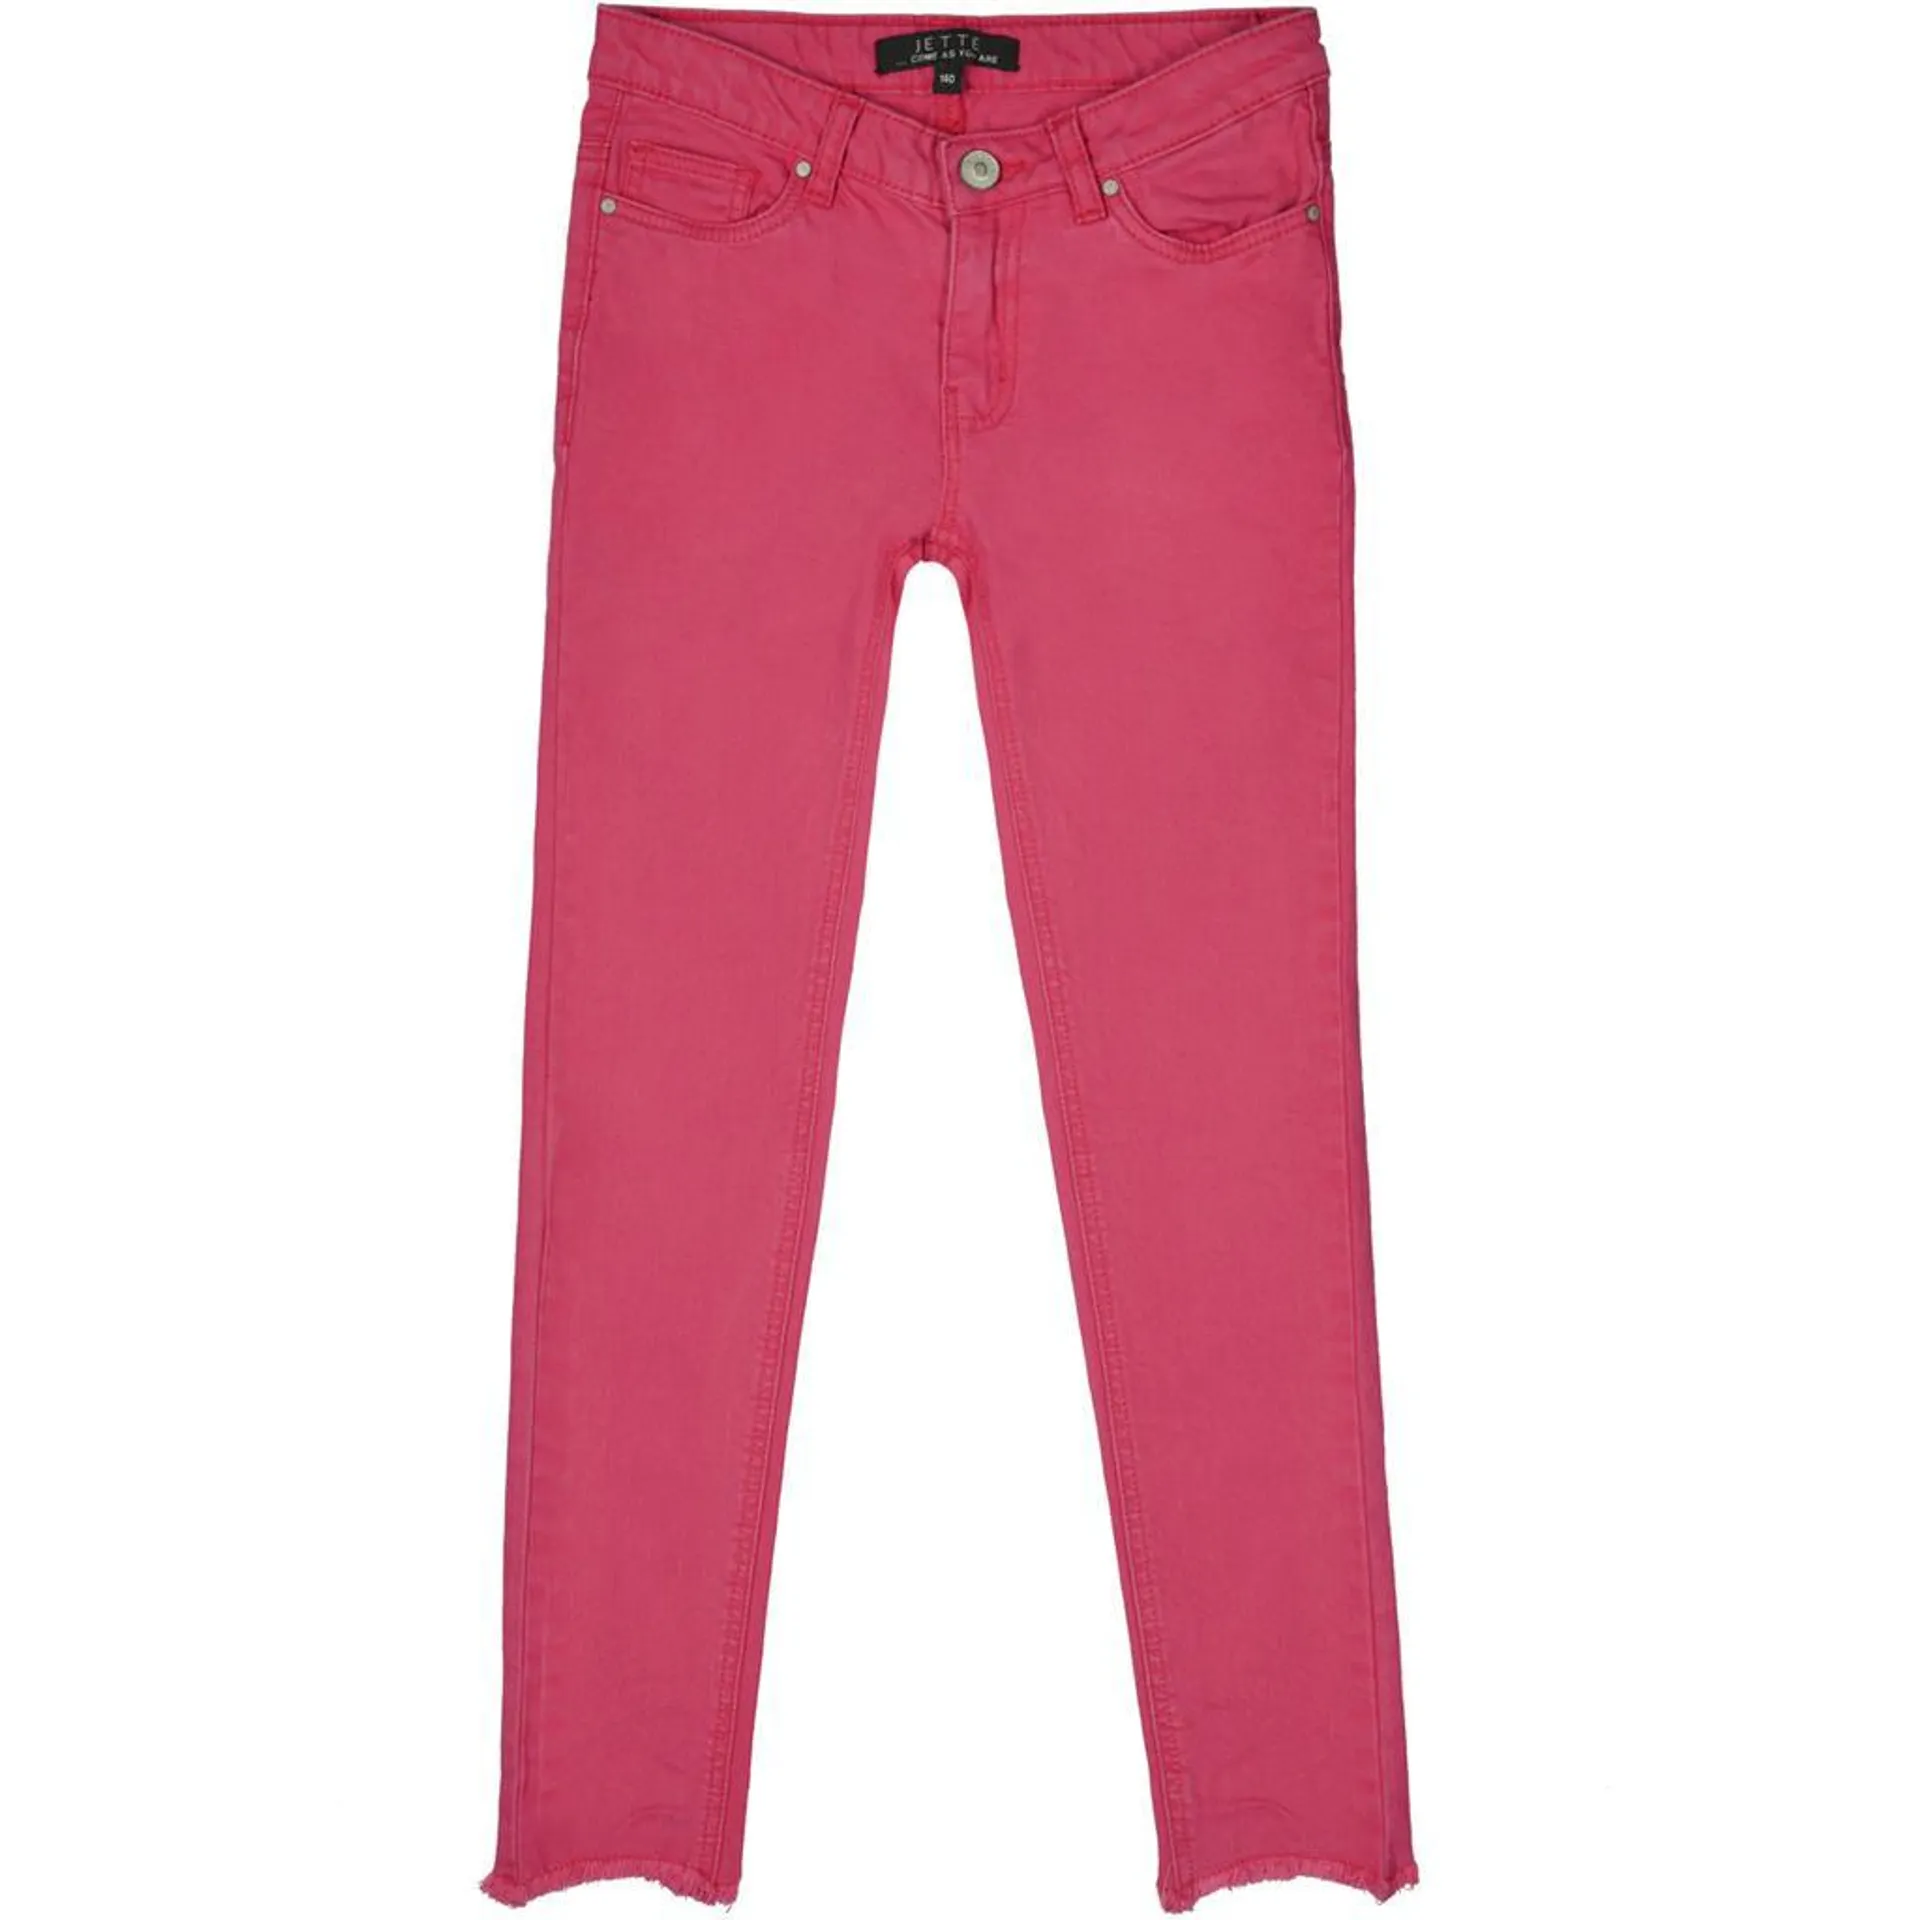 Colordenim, BRIGHT PINK